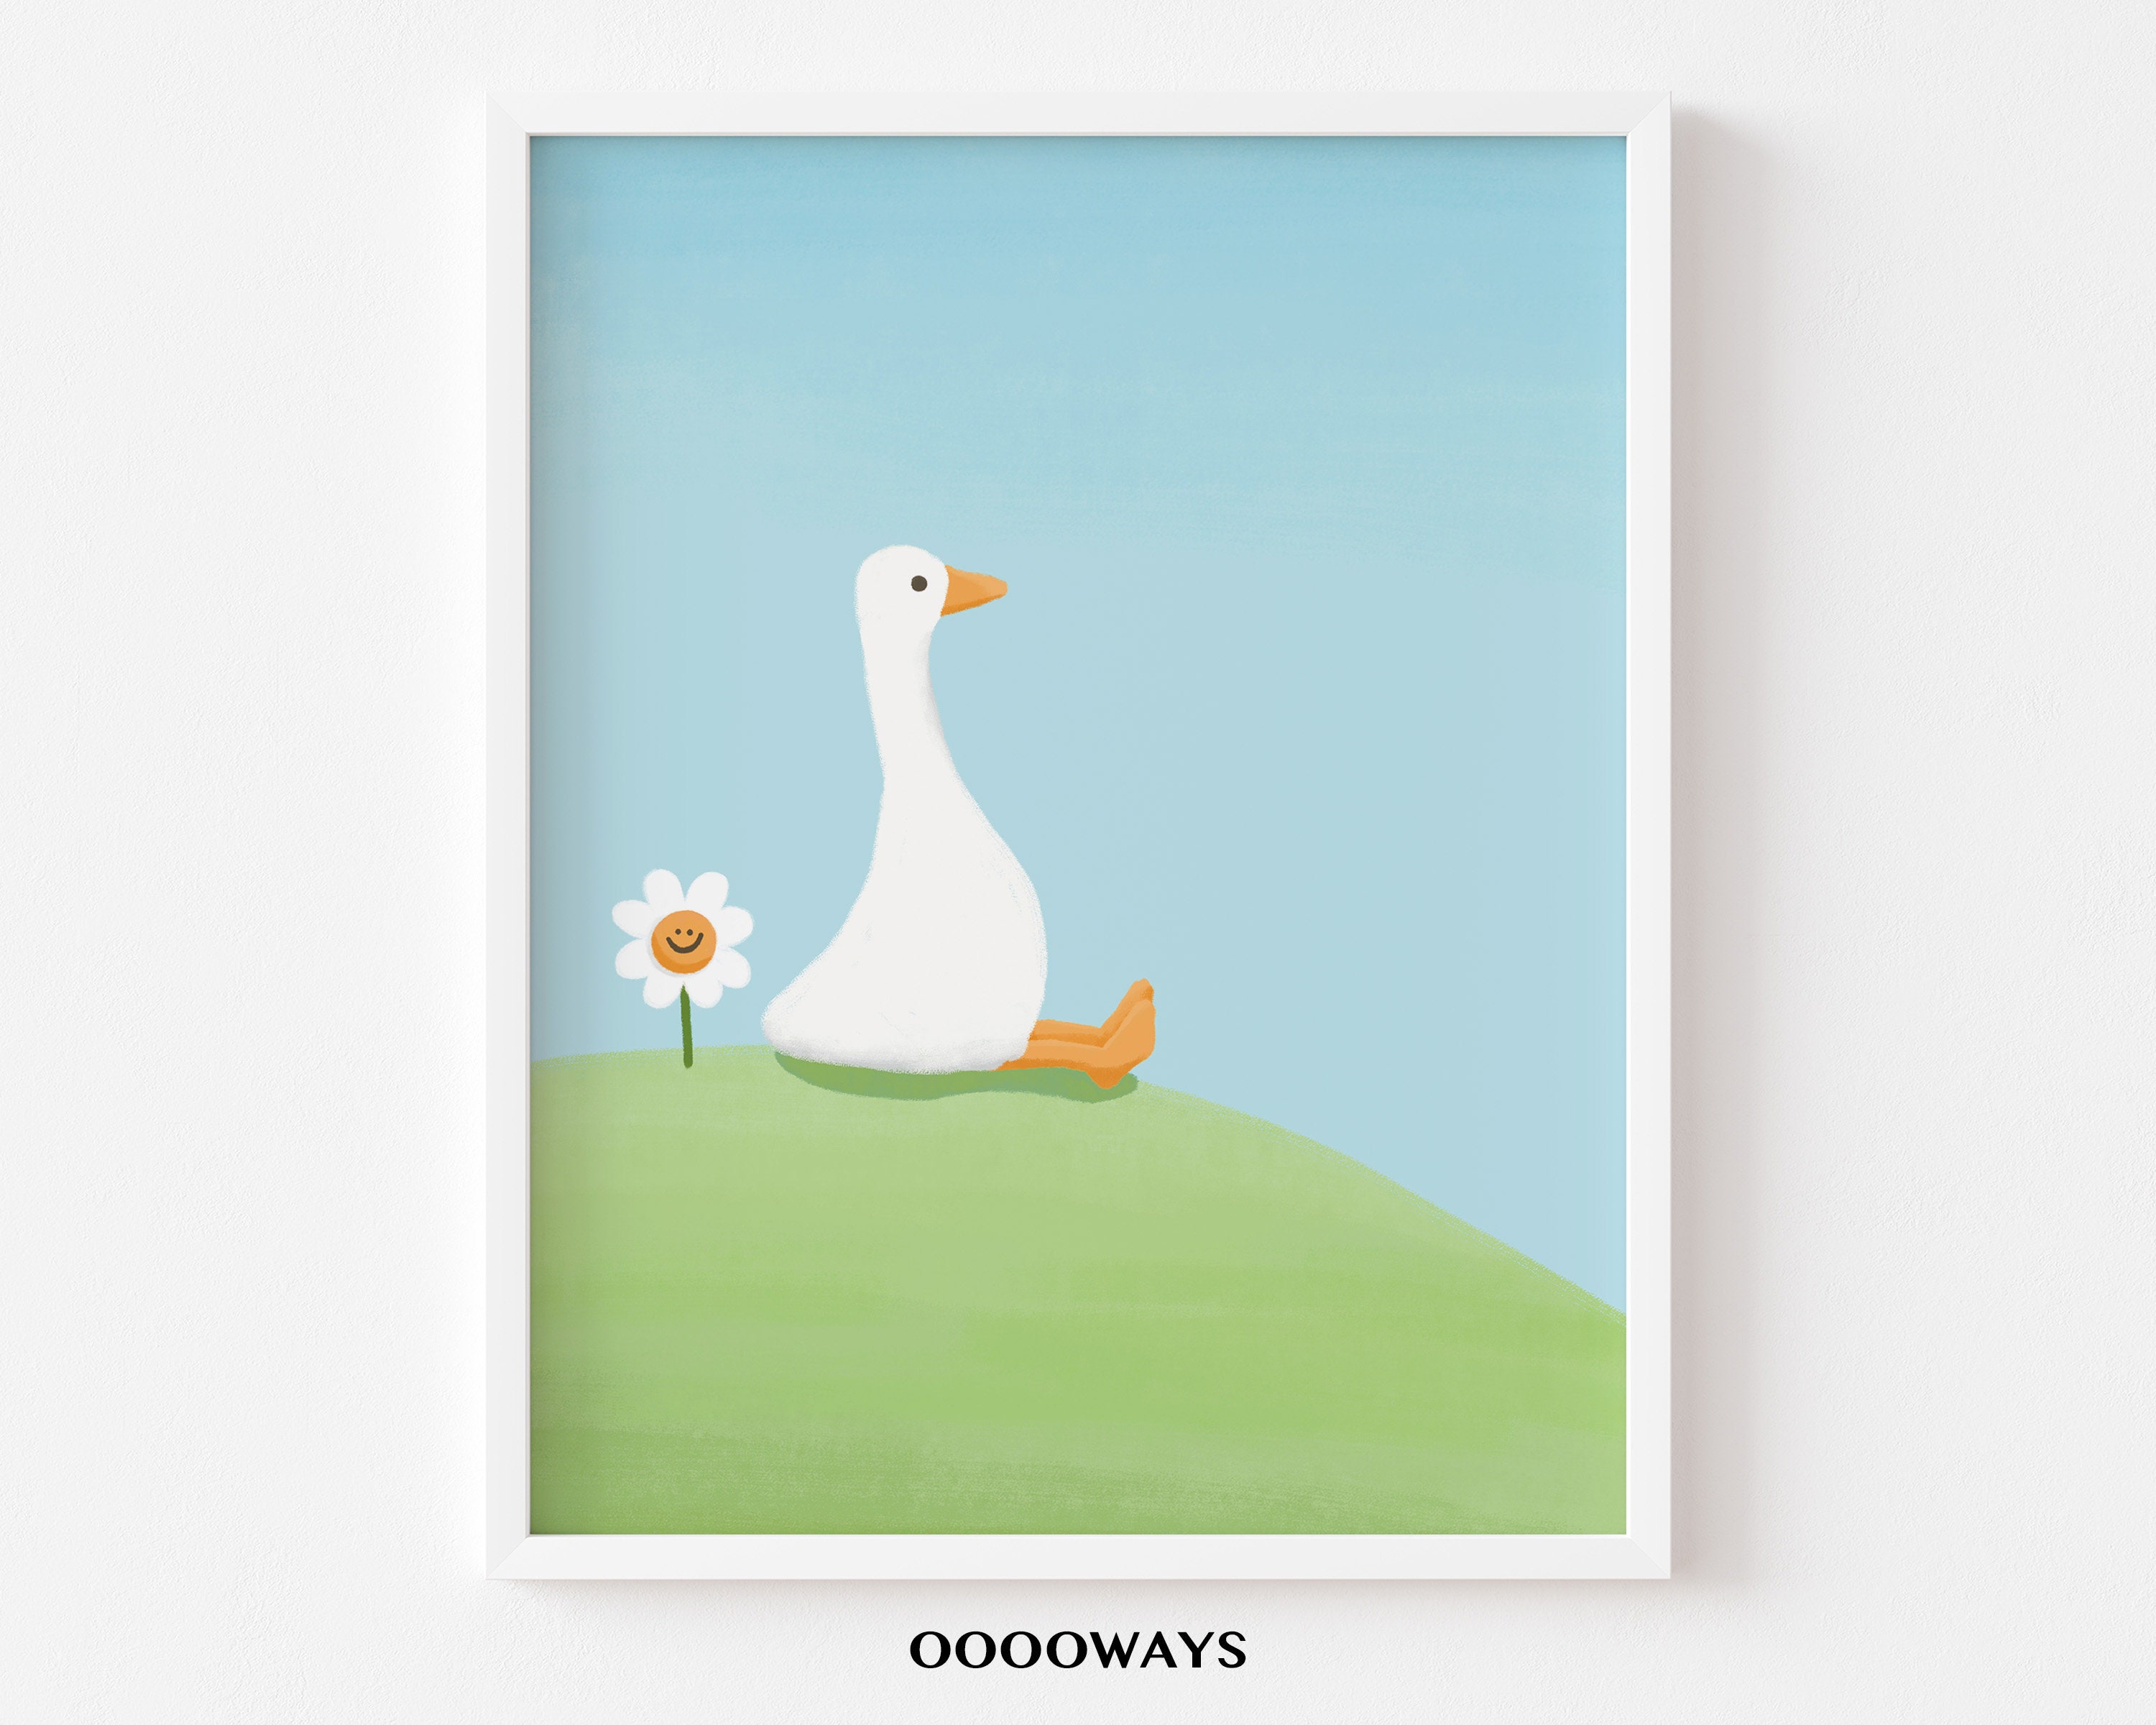 I designed using AI posters for Untitled Goose Game 2 : r